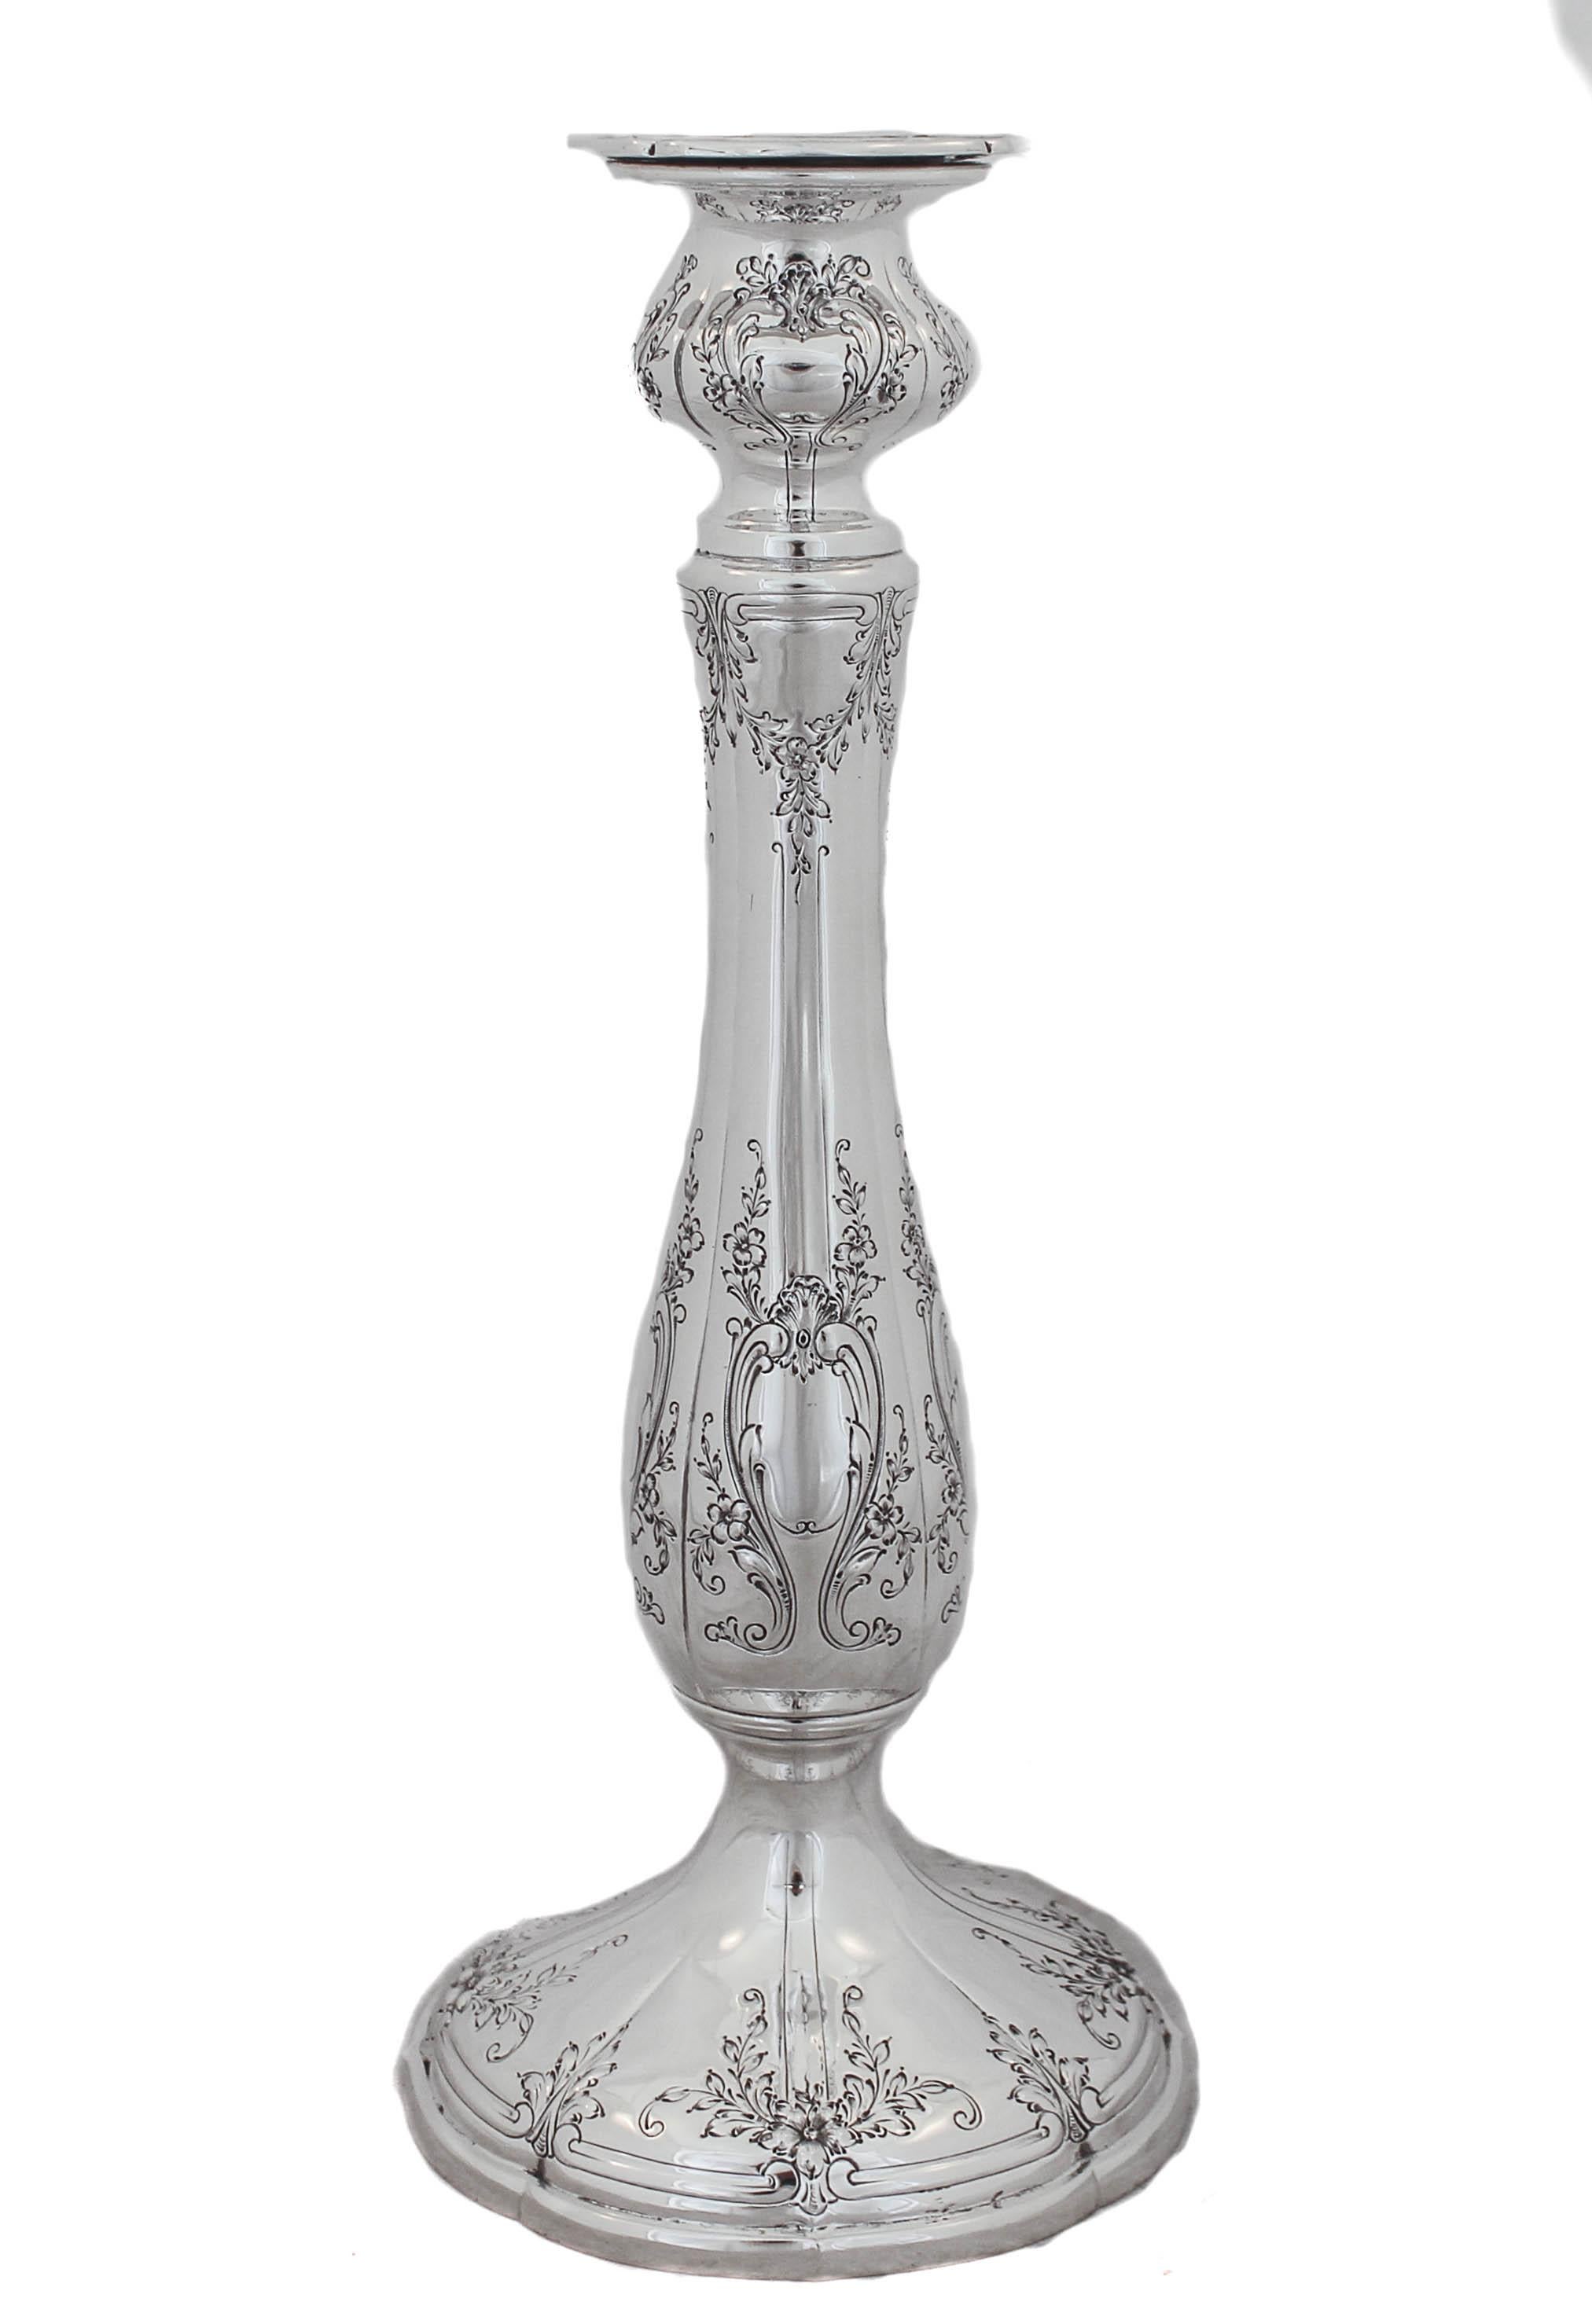 This sterling silver candlesticks are simply gorgeous!! They are 12 inches tall and have a lovely silhouette. There are garlands and flowers from top to bottom. Notice the workmanship around the scalloped base. Every detail was done to perfection!